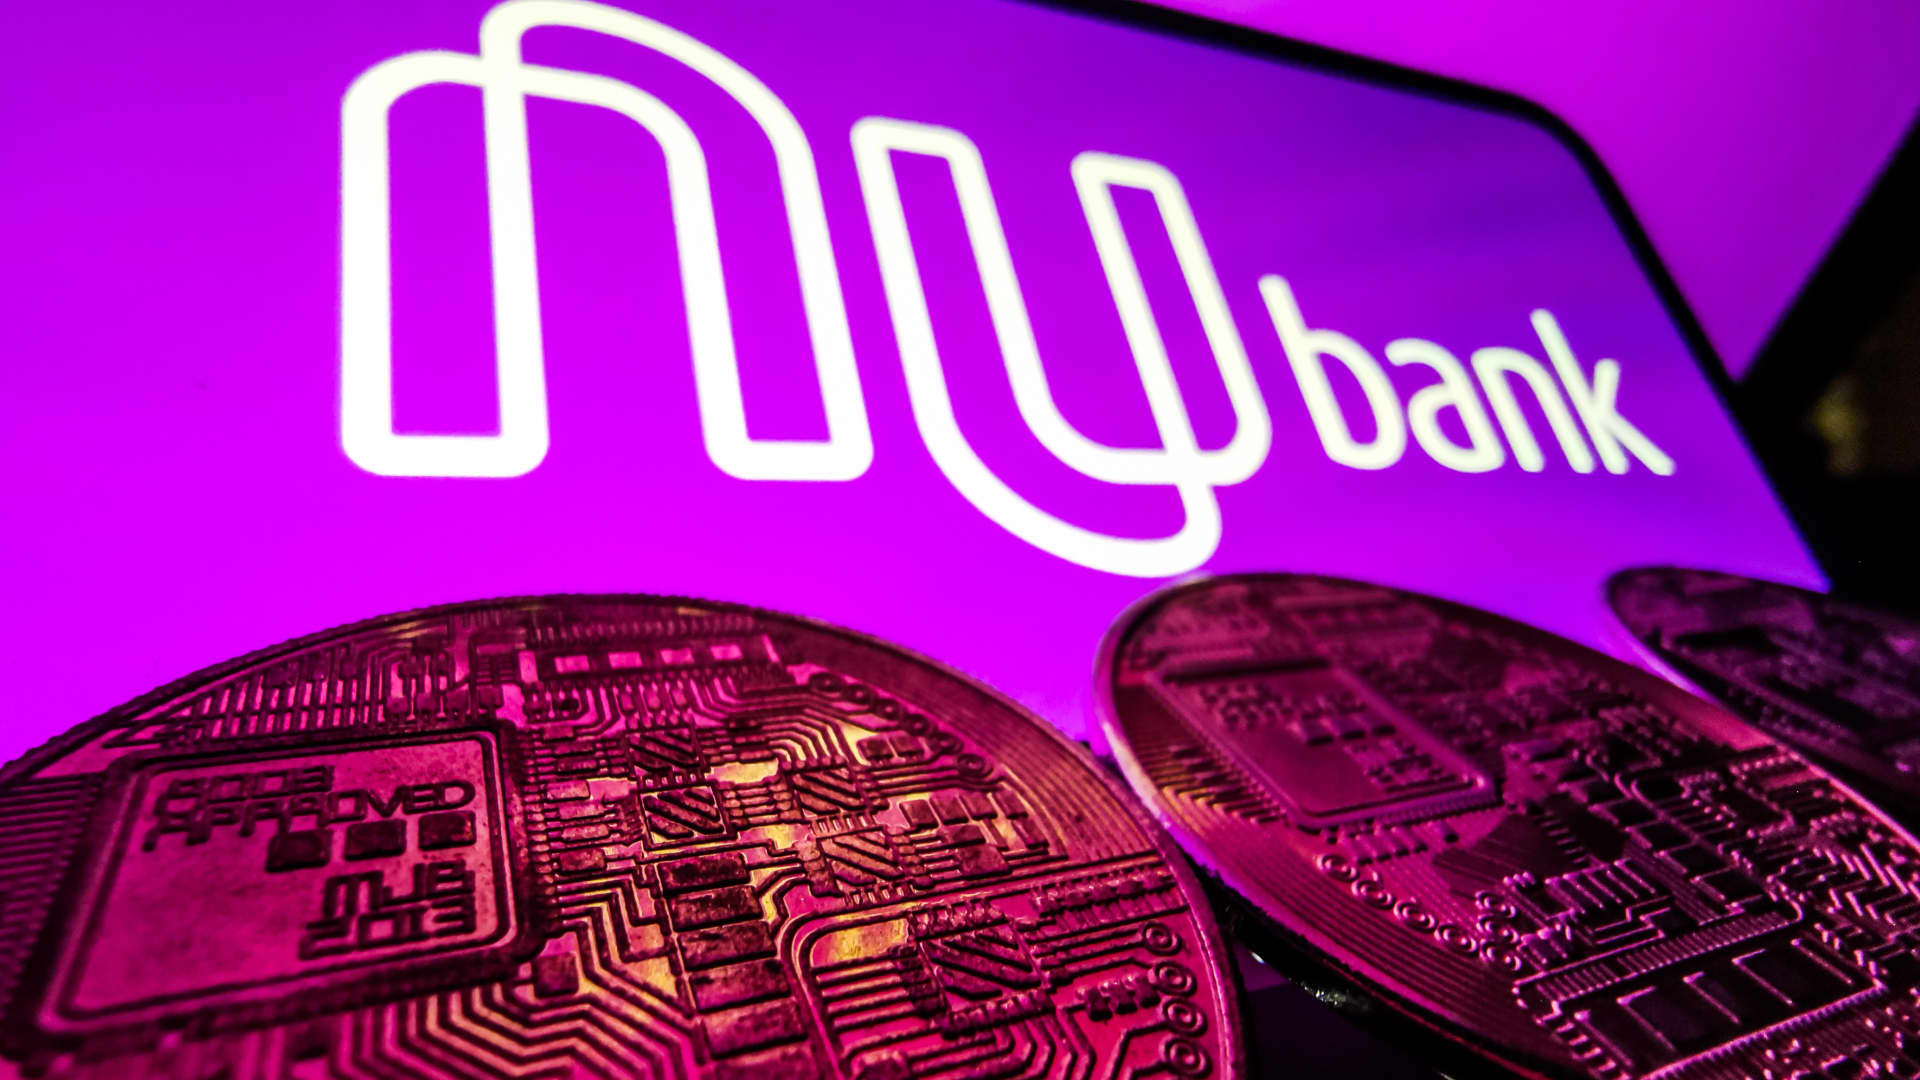 Buffett-backed digital bank Nubank to launch its own cryptocurrency in Brazil